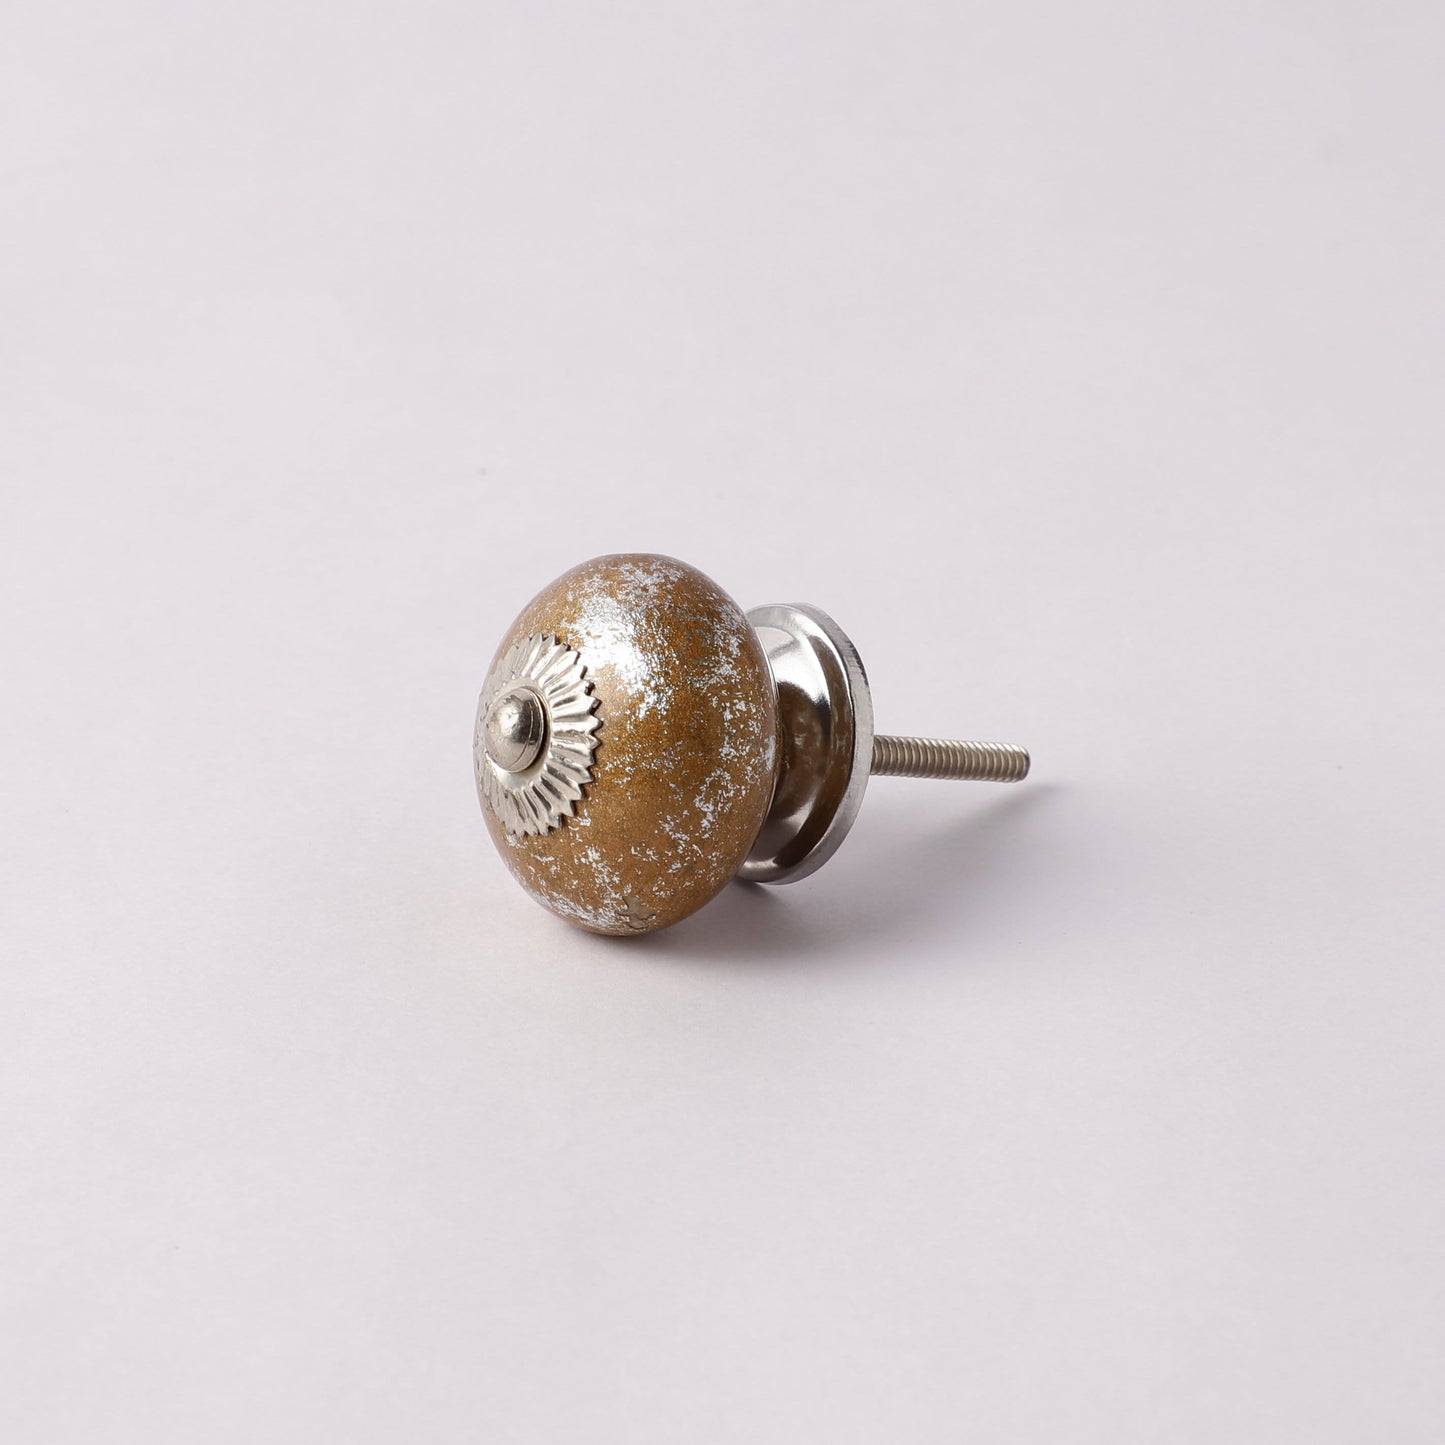 Weathered Brown and Distressed Beige Ceramic Pull Knob (C2)